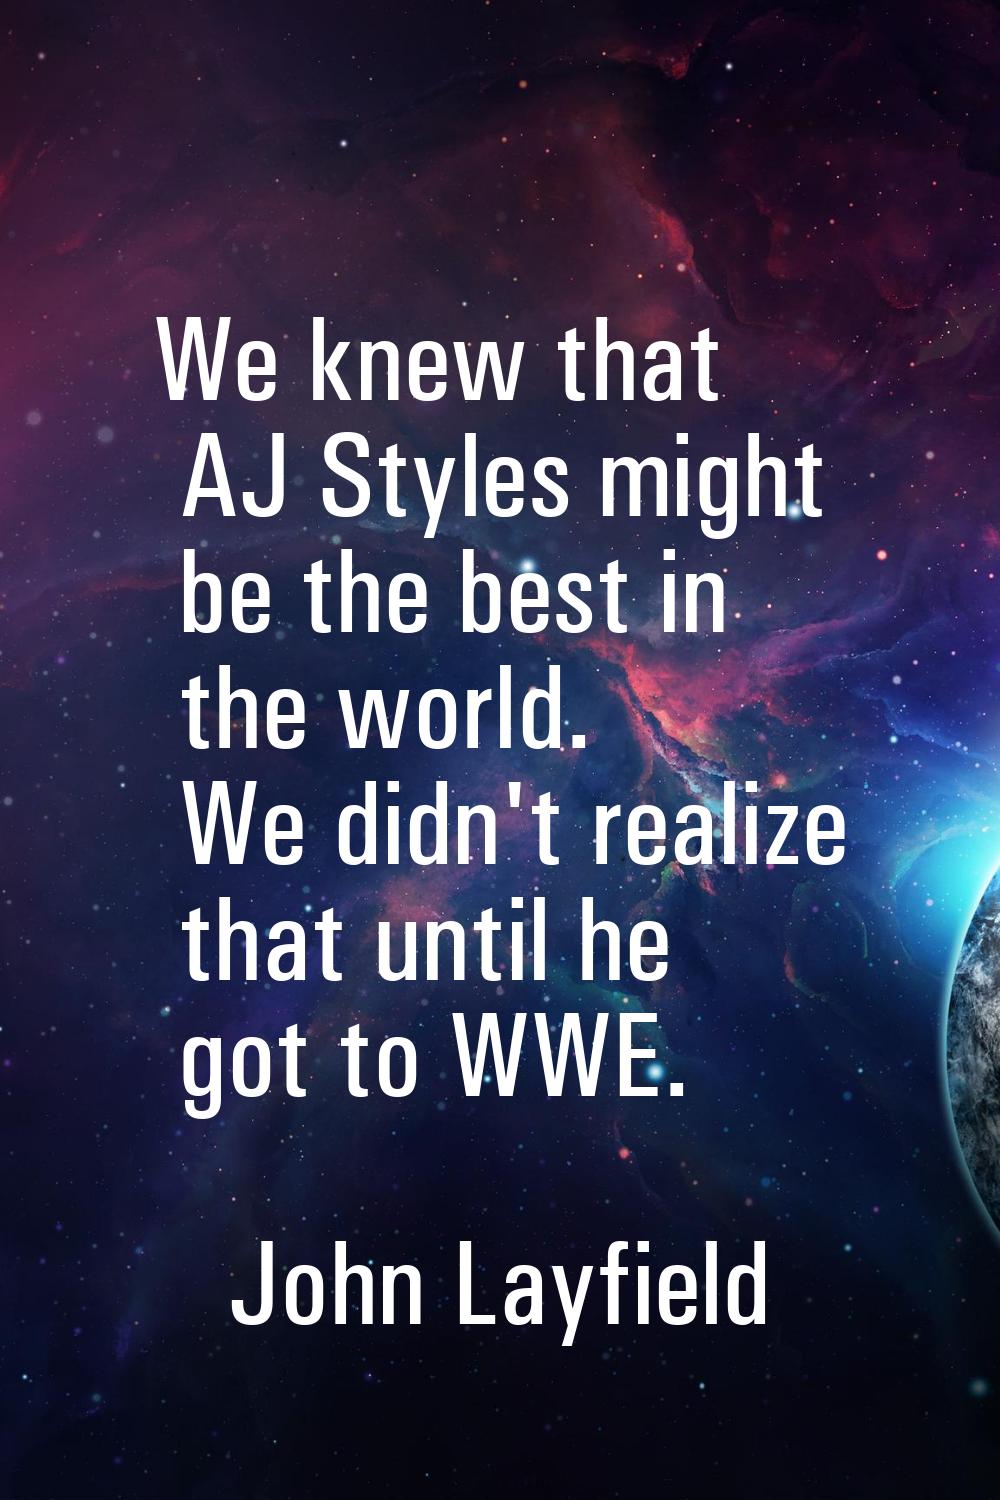 We knew that AJ Styles might be the best in the world. We didn't realize that until he got to WWE.